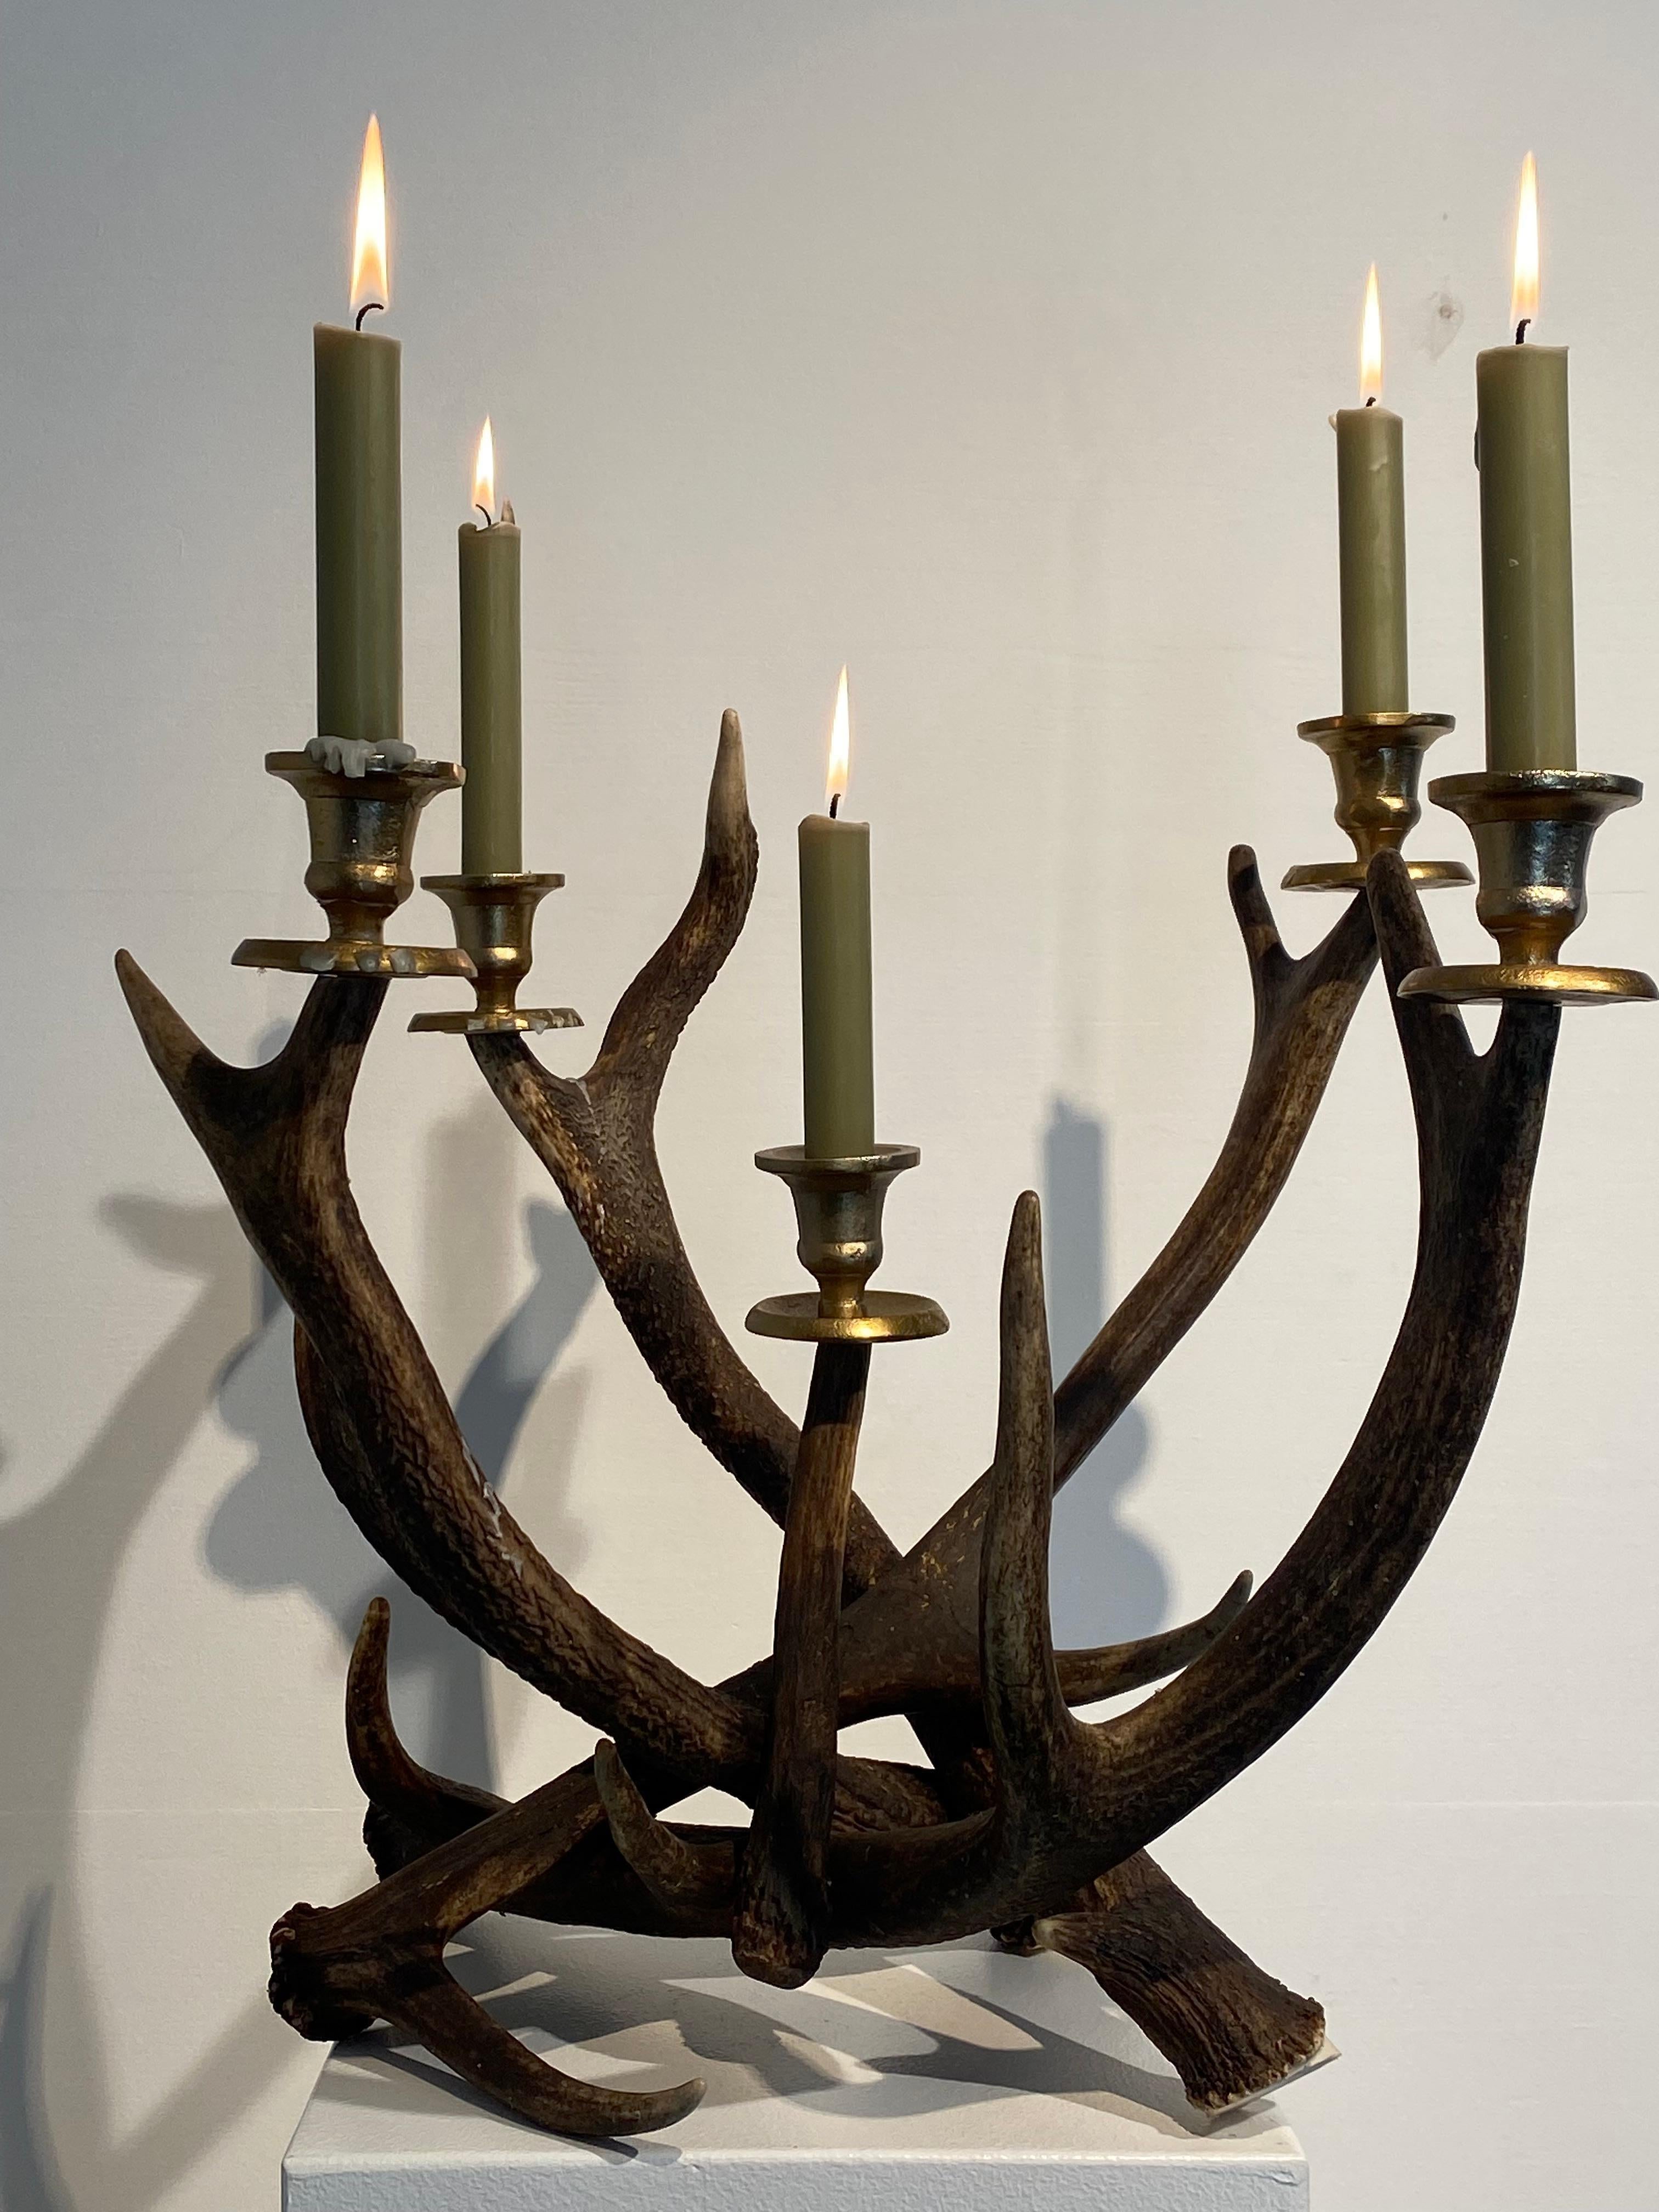 Elegant and Rustic Candle holder made out of Deer Horns,
elegant object with 5 candle holders, warm shine and patina of the horns,
very decorative item